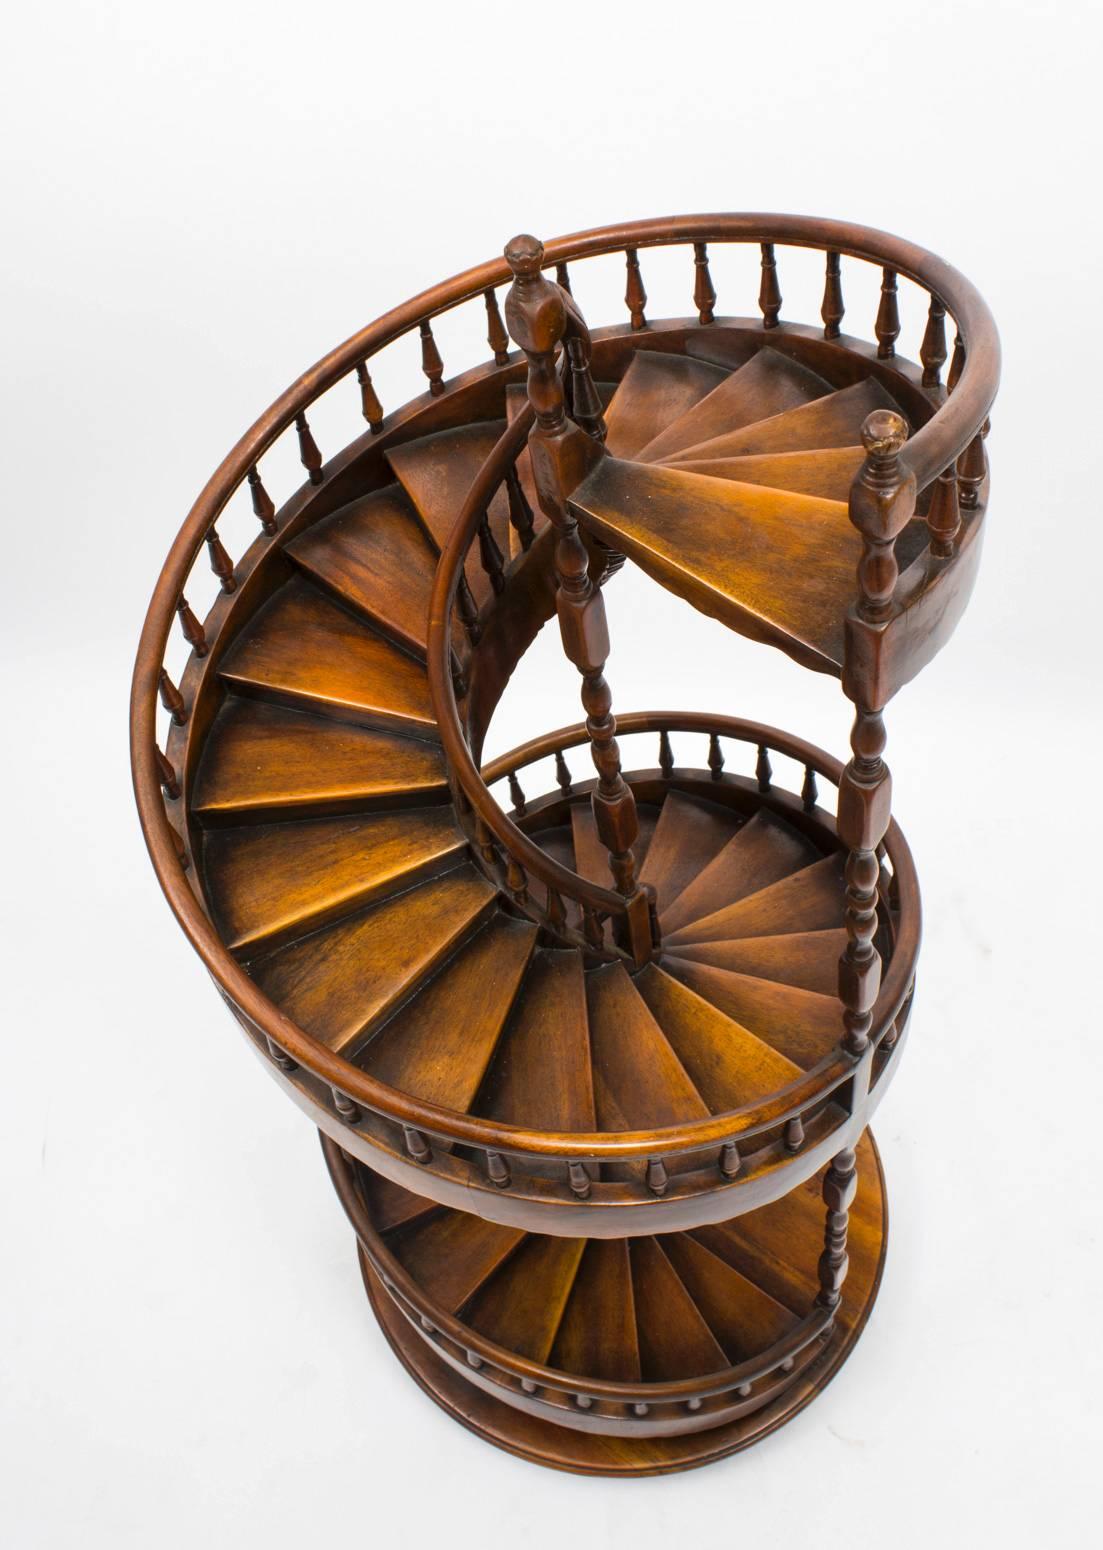 Vintage Mahogany Architectural Model Spiral Staircase 1